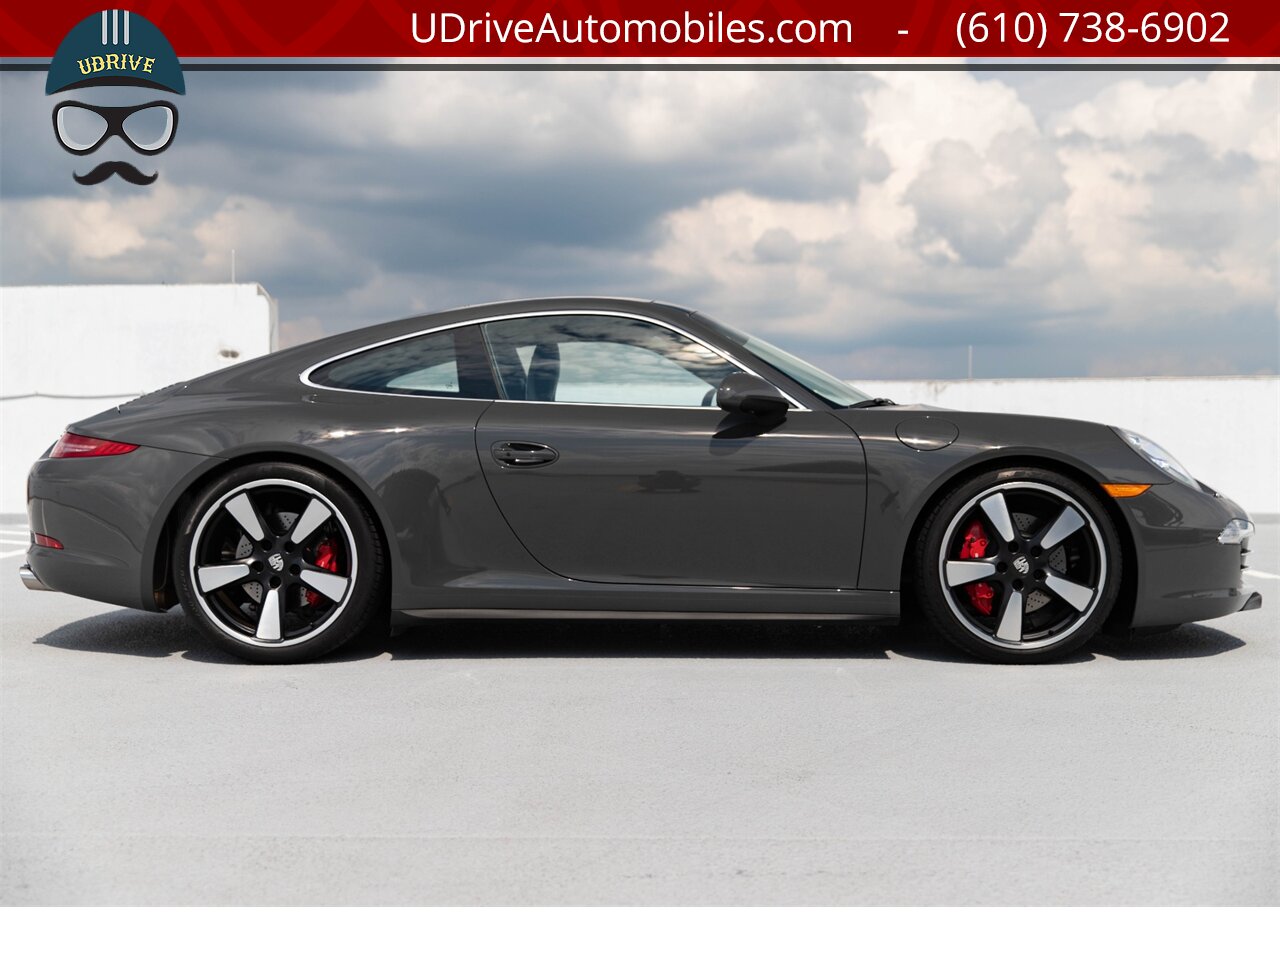 2014 Porsche 911 Carrera S 50th Anniversary Edition Certified  CPO Warranty thru 12/26/21 Full Front End Clear Film - Photo 15 - West Chester, PA 19382